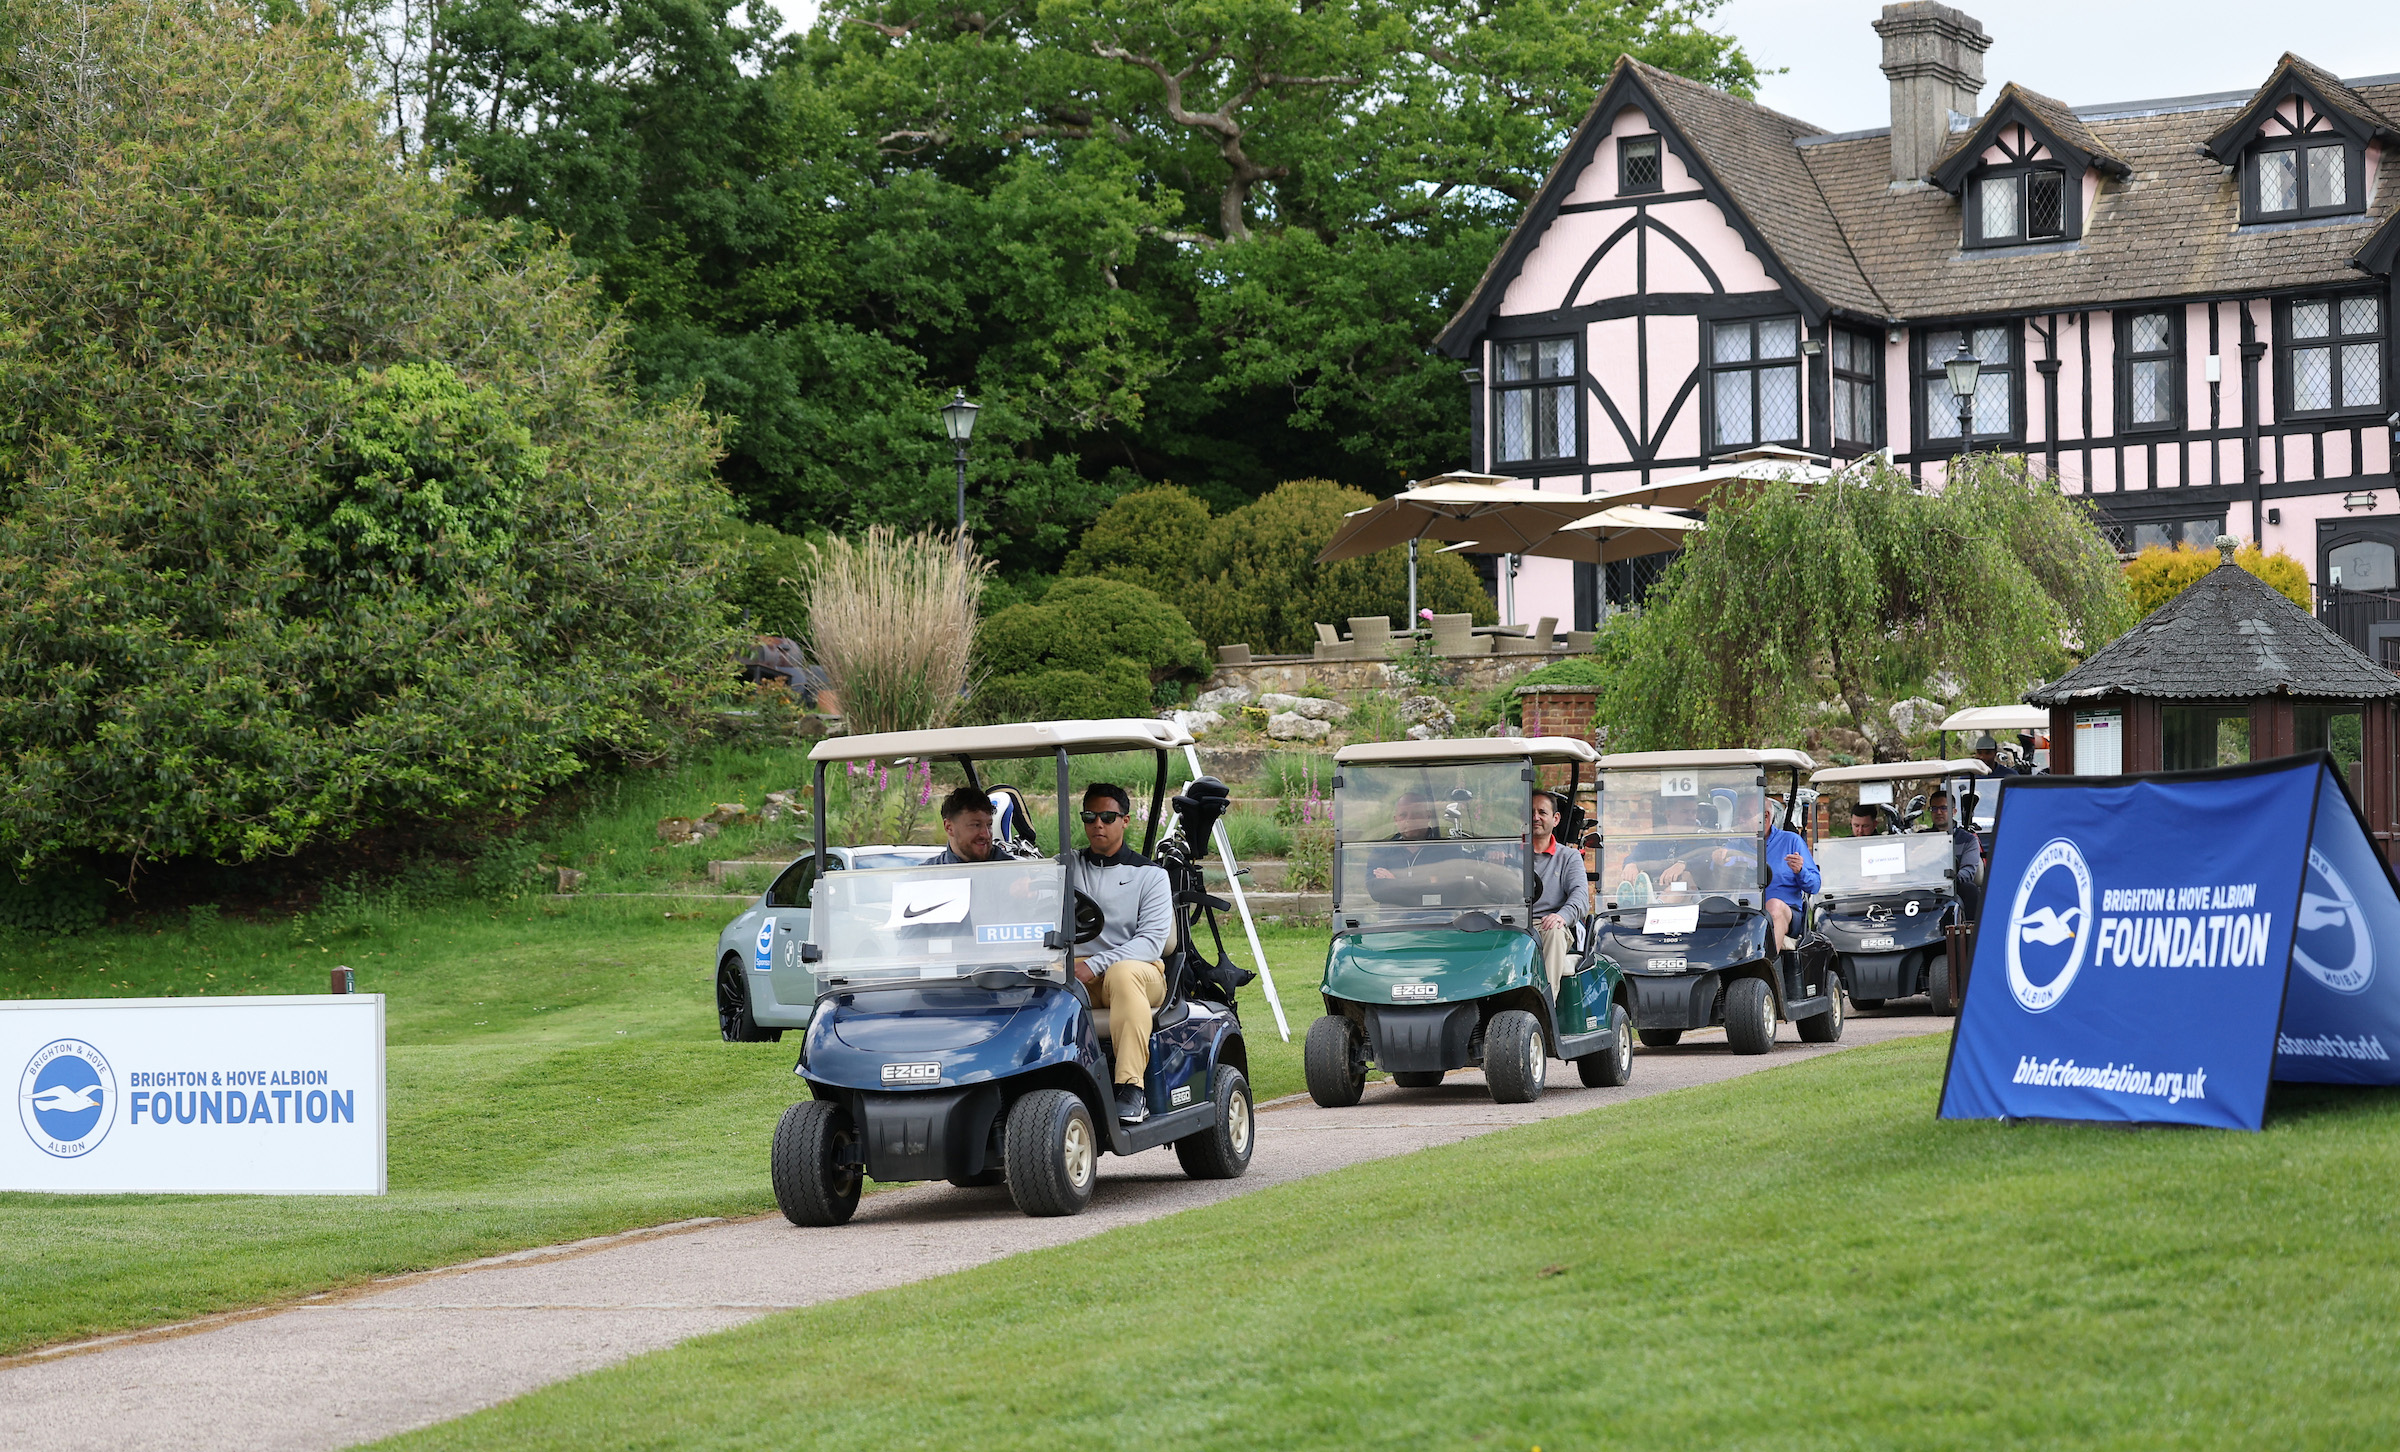 £72k raised for Foundation at Albion golf day